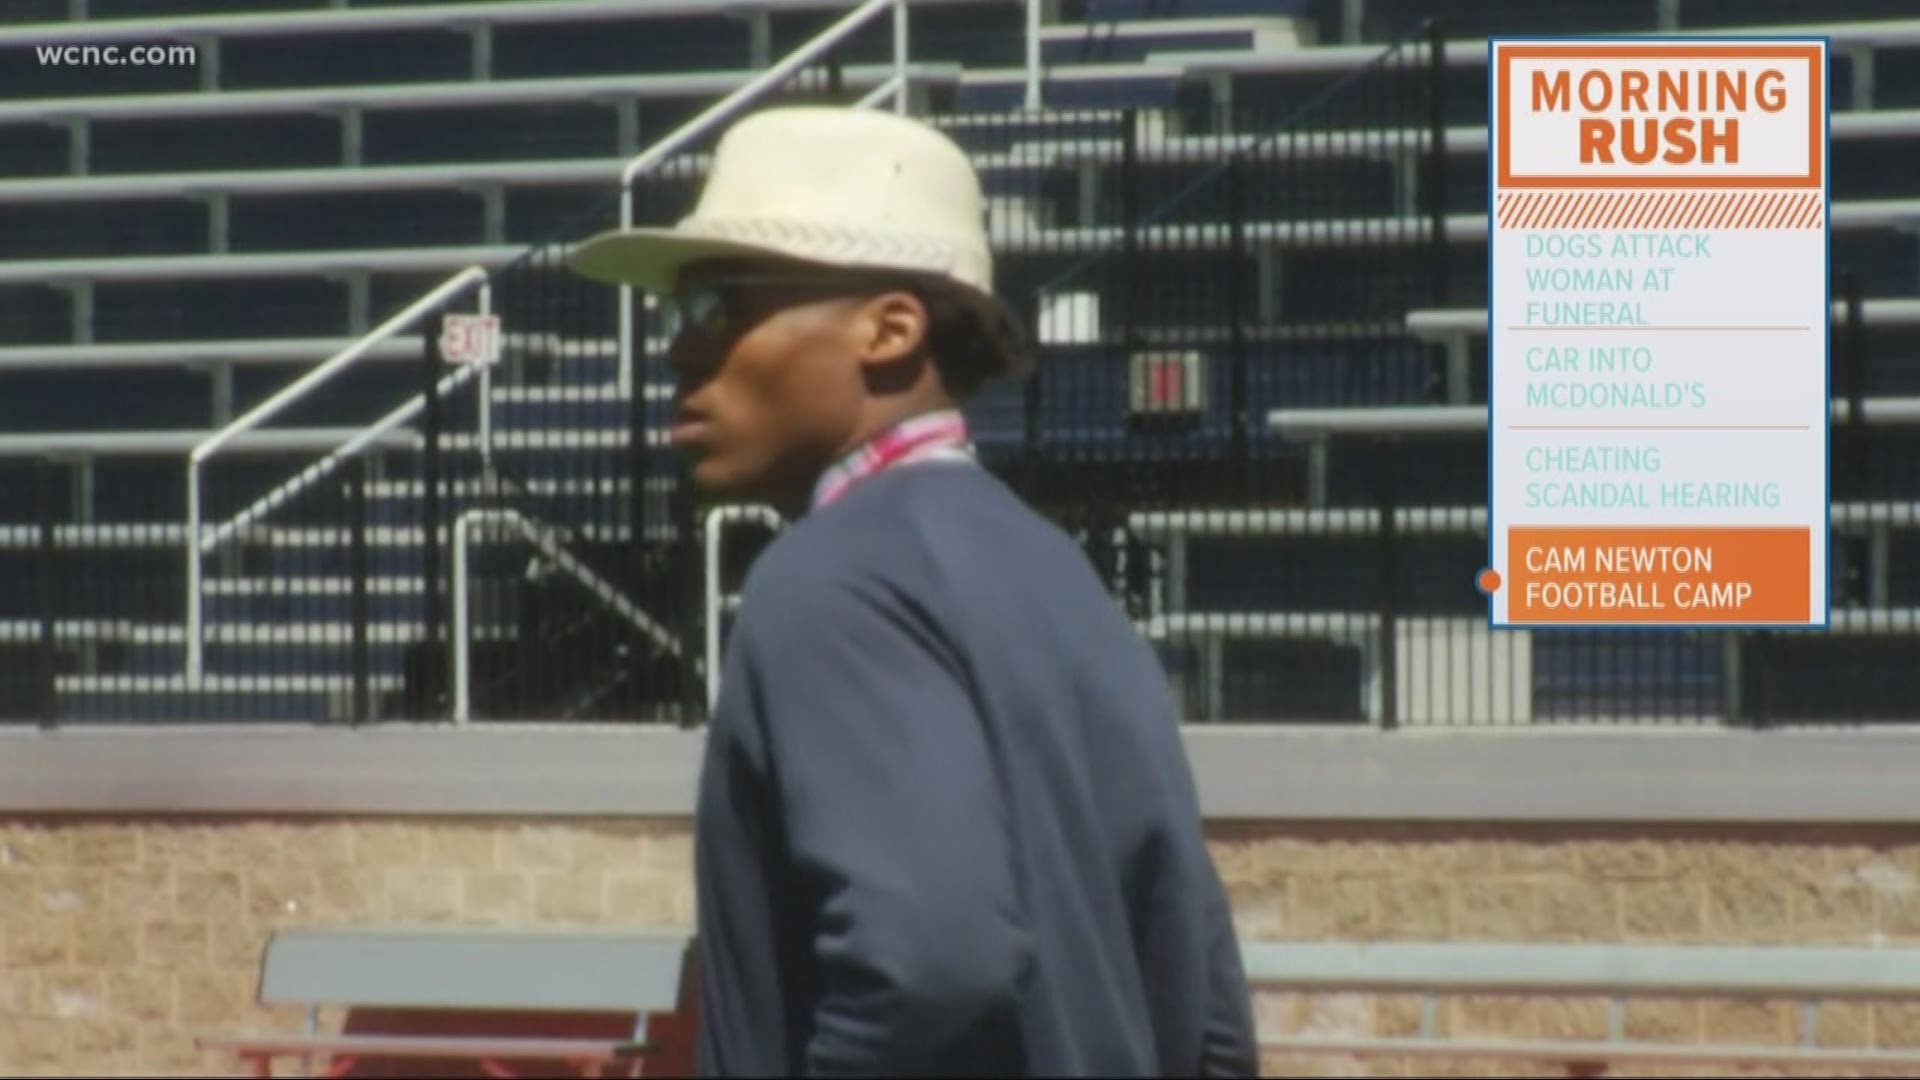 Panthers quarterback Cam Newton announced that he will be hosting a football camp in Savannah, Georgia this summer featuring 24 high school teams from across the Peach State.